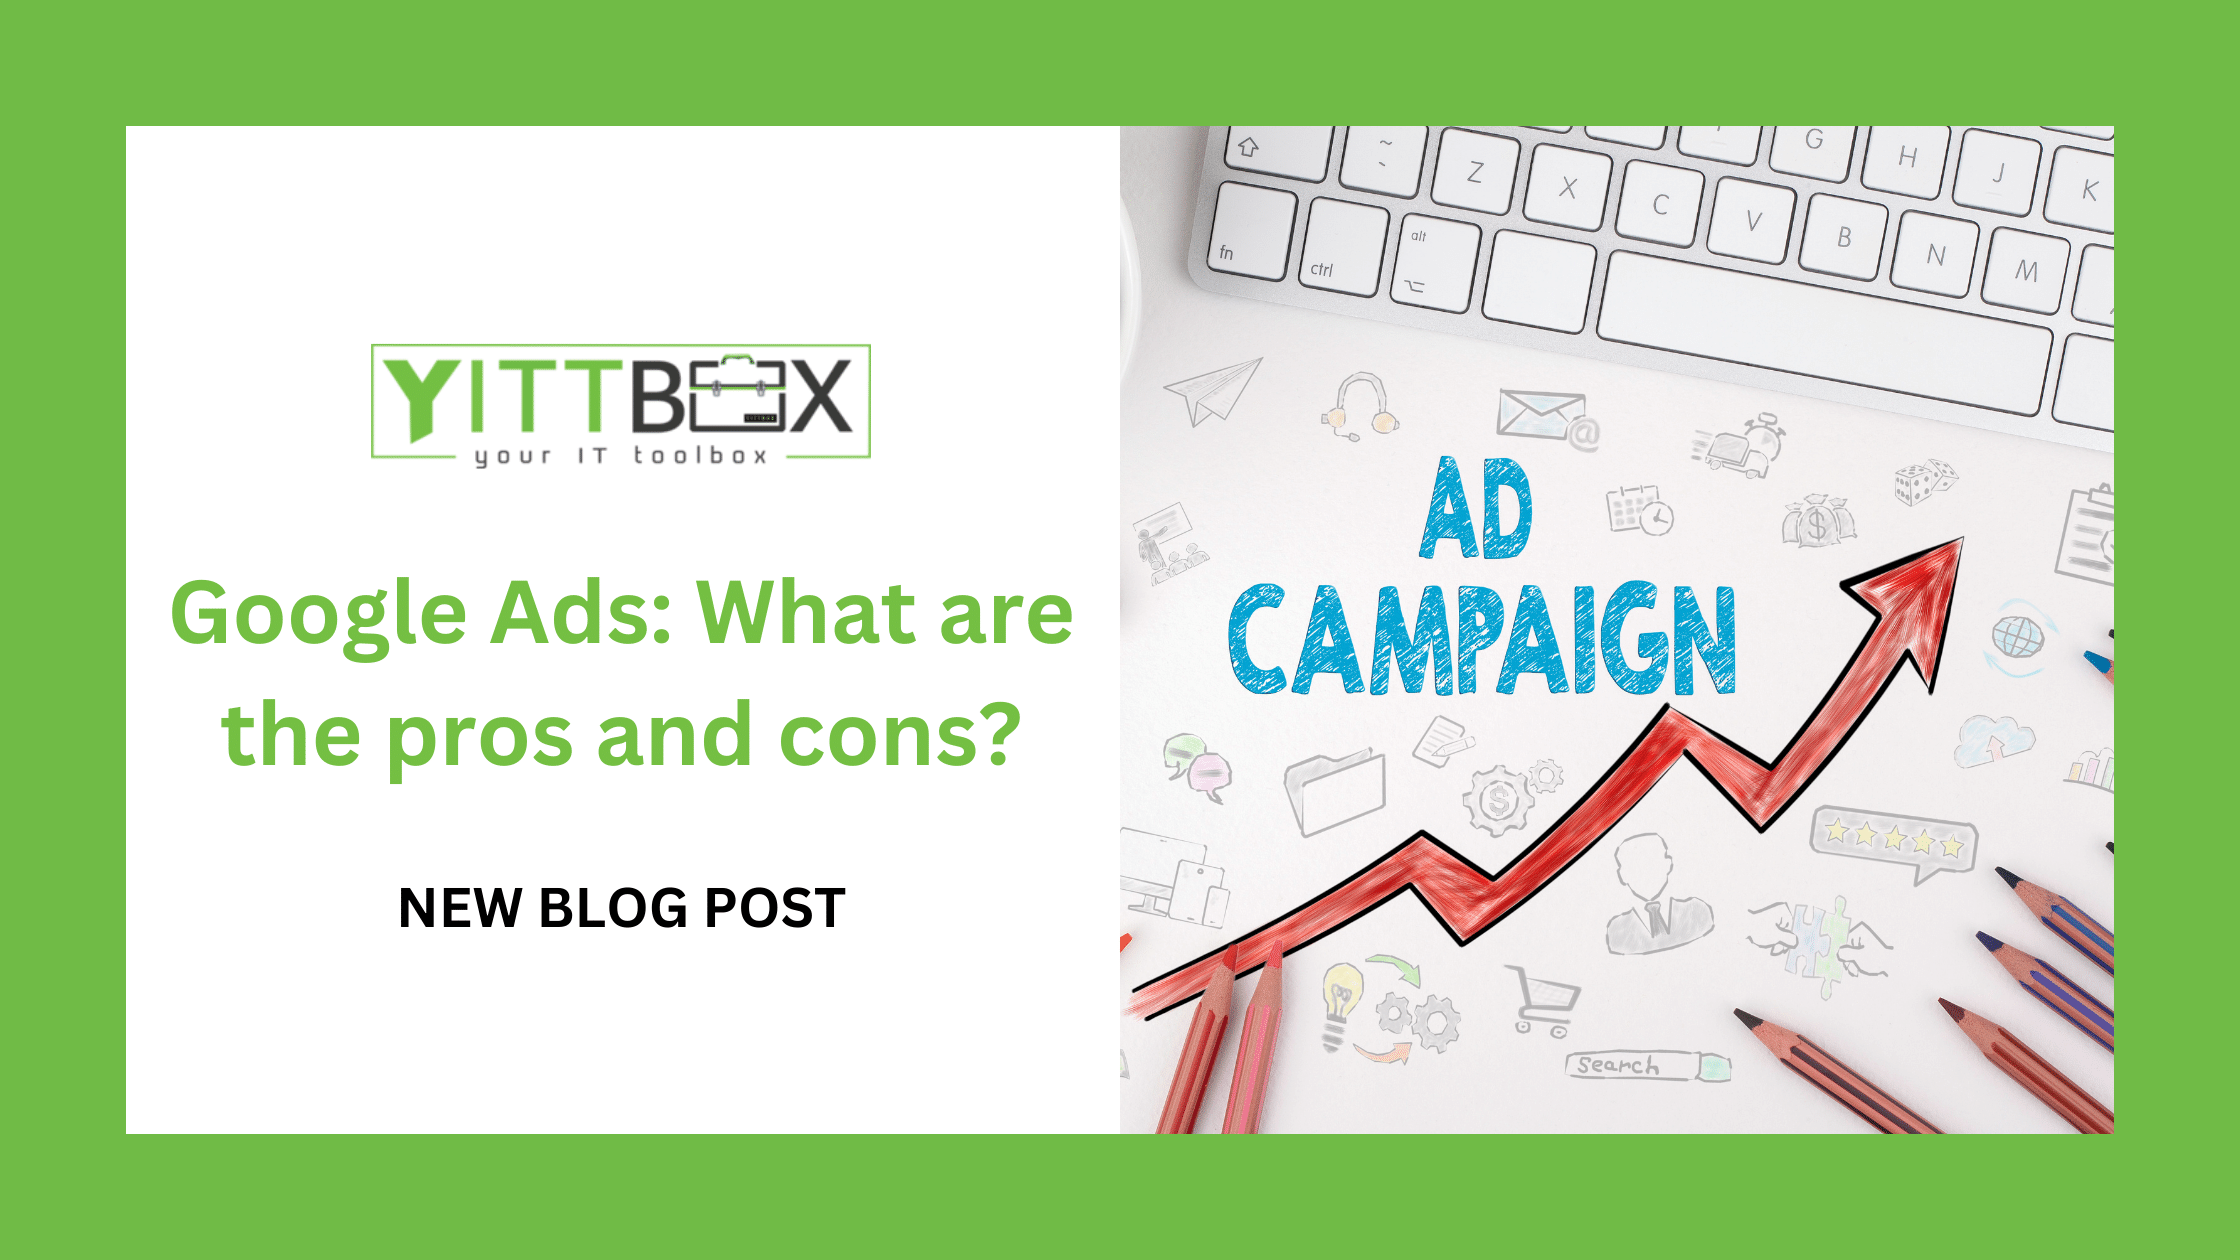 Google Ads: What are the pros and cons?